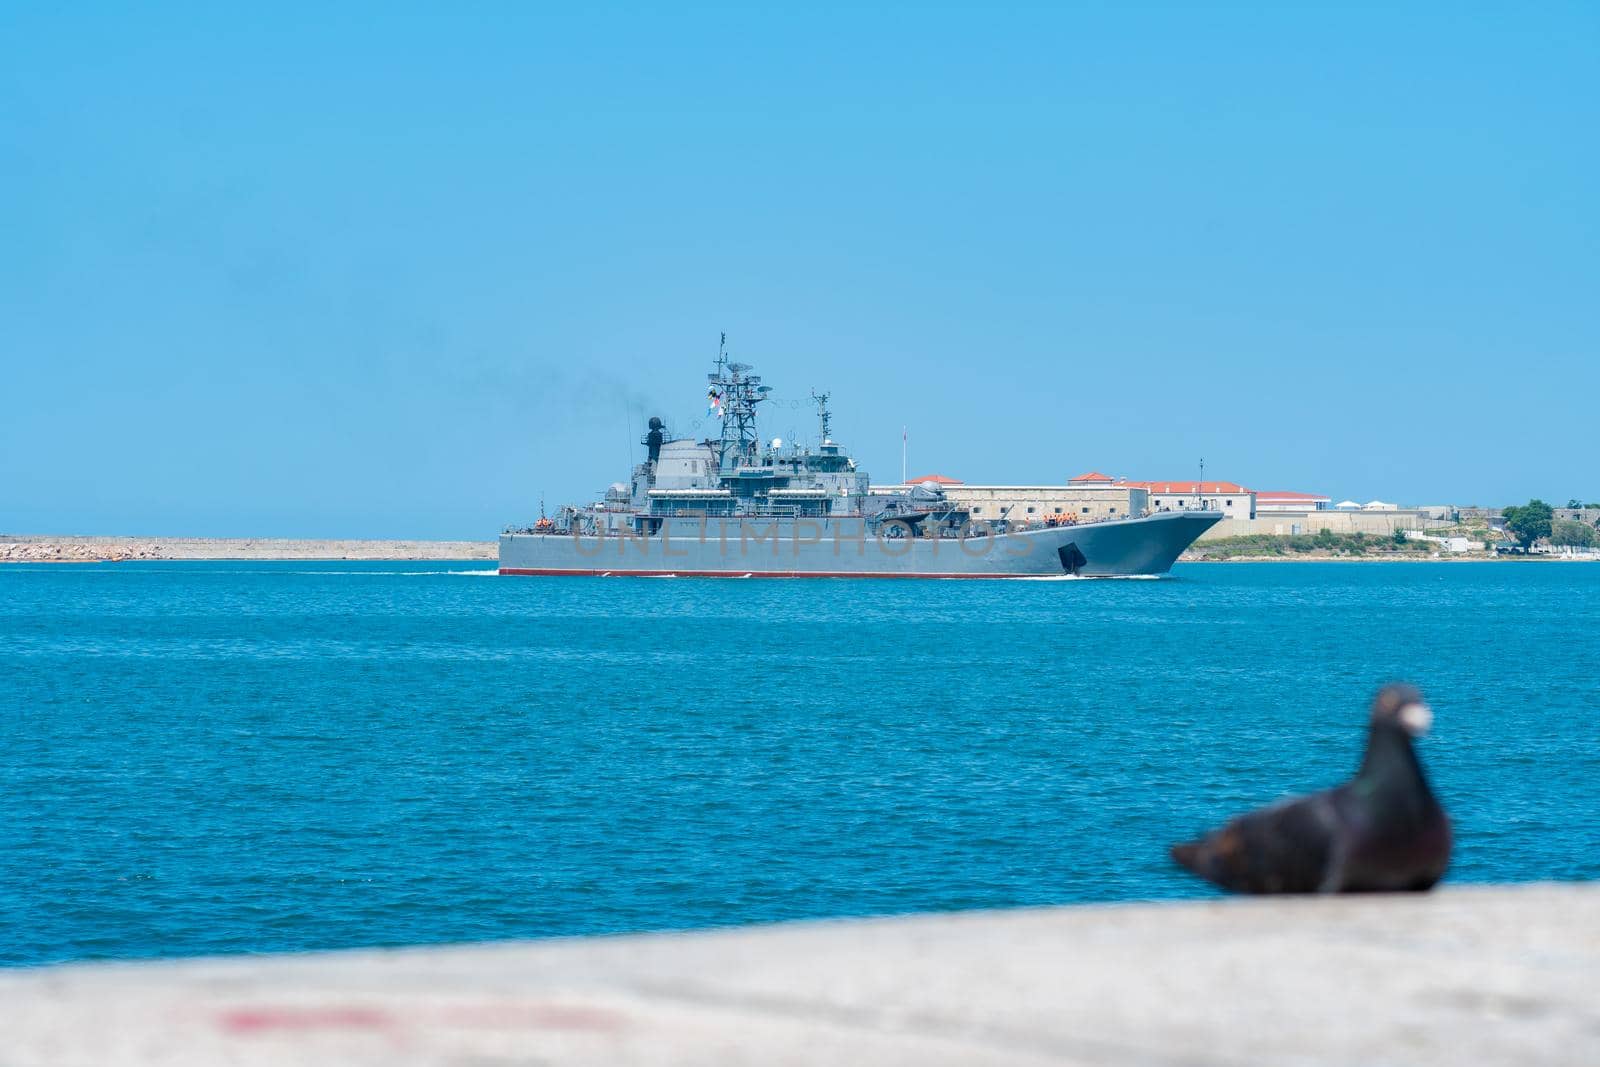 RUSSIA, CRIMEA - JUL 08, 2022: Russian sevastopol navy russia military group day sky city rehearsal, from black ship for fleet for armed force, transport defense. Destroyer gray,